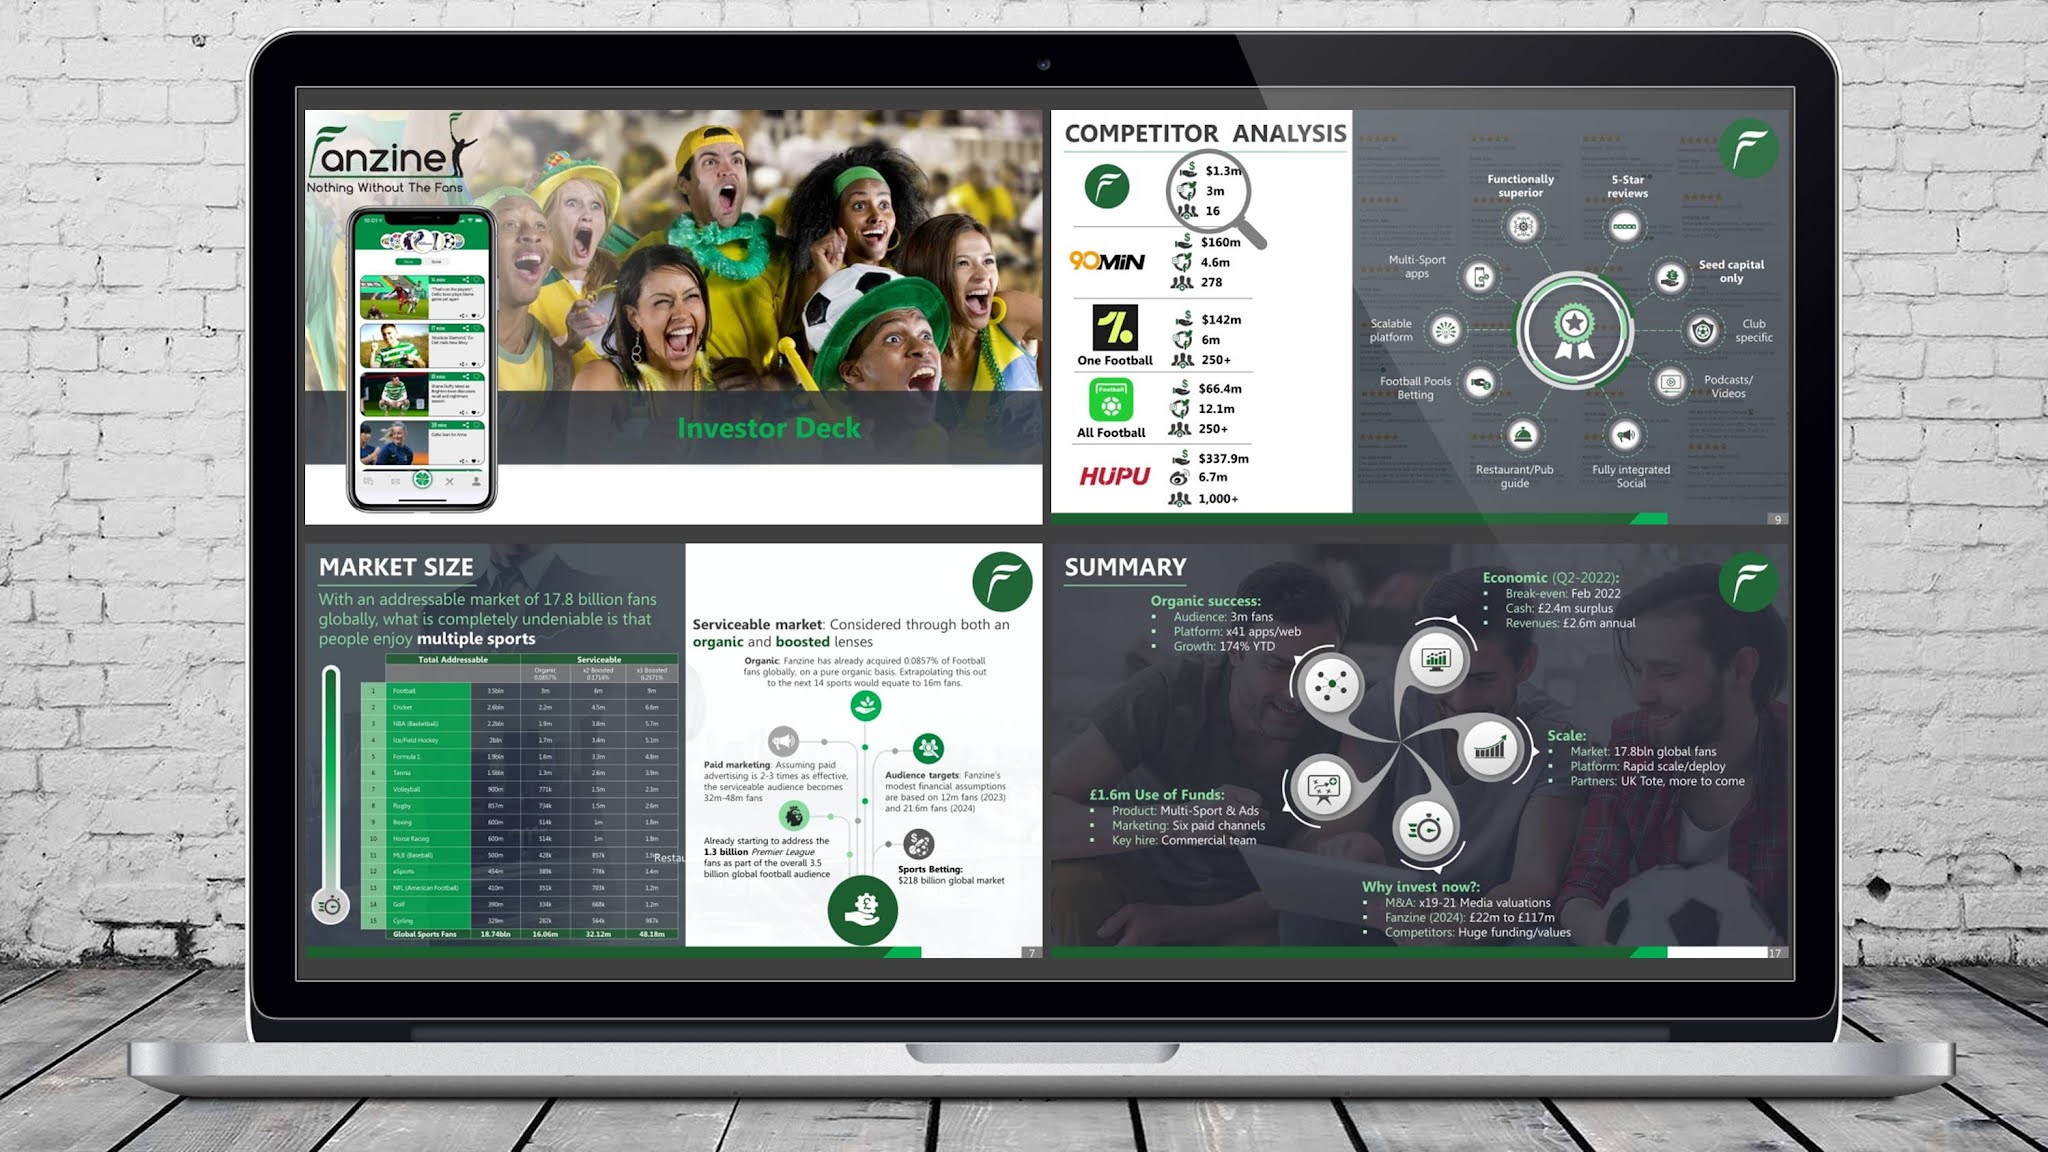 Sports mobile application PowerPoint investor pitch deck that demonstrates all the features and advantages of a platform for Premier League fans.